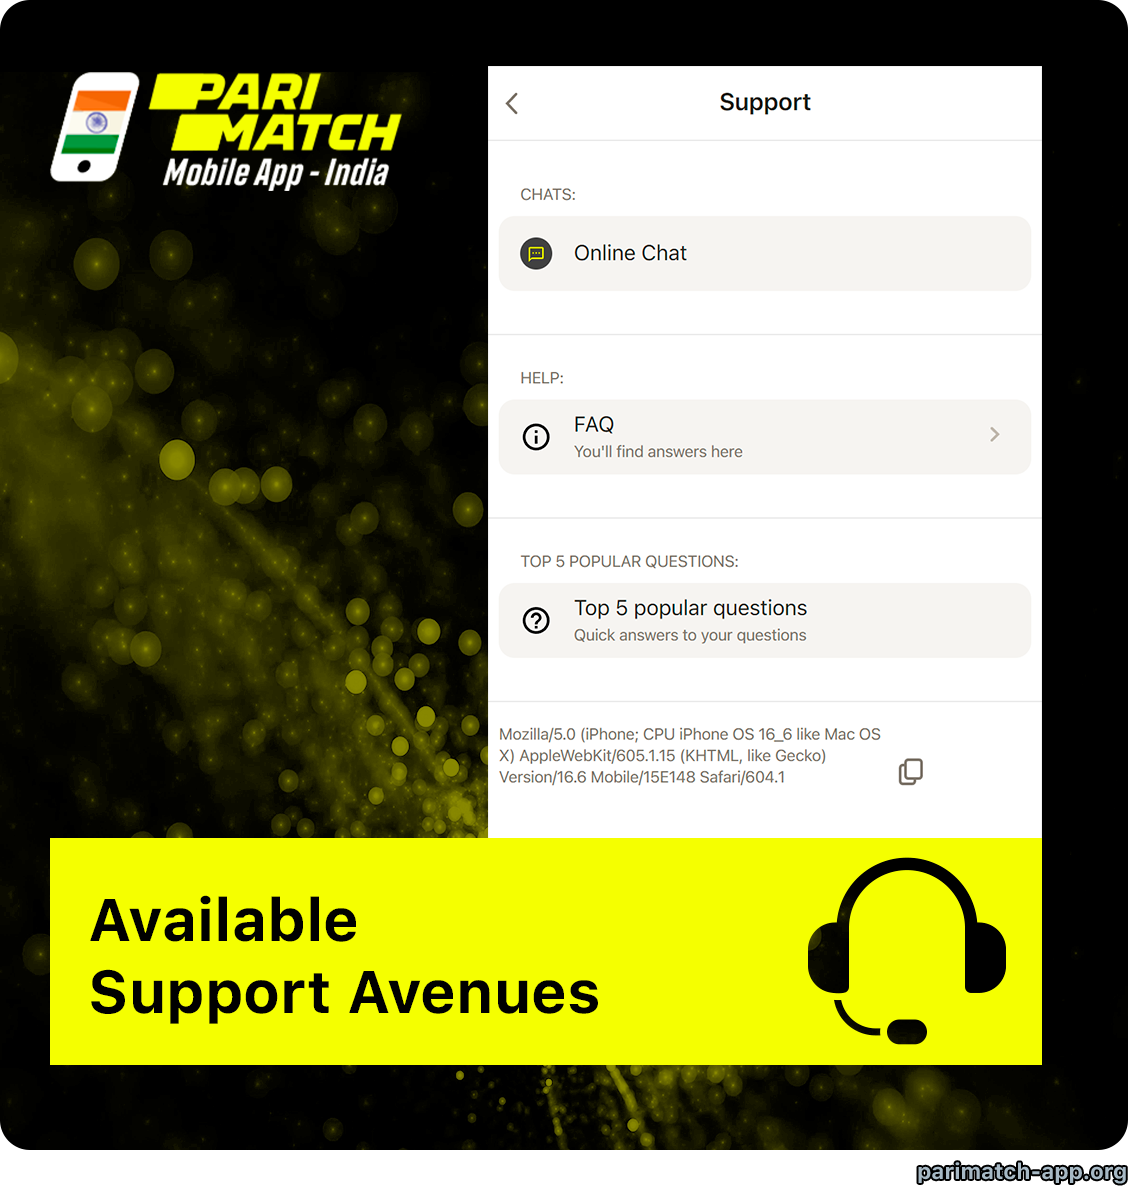 Available Ways to Contact Customer Support at Parimatch App India